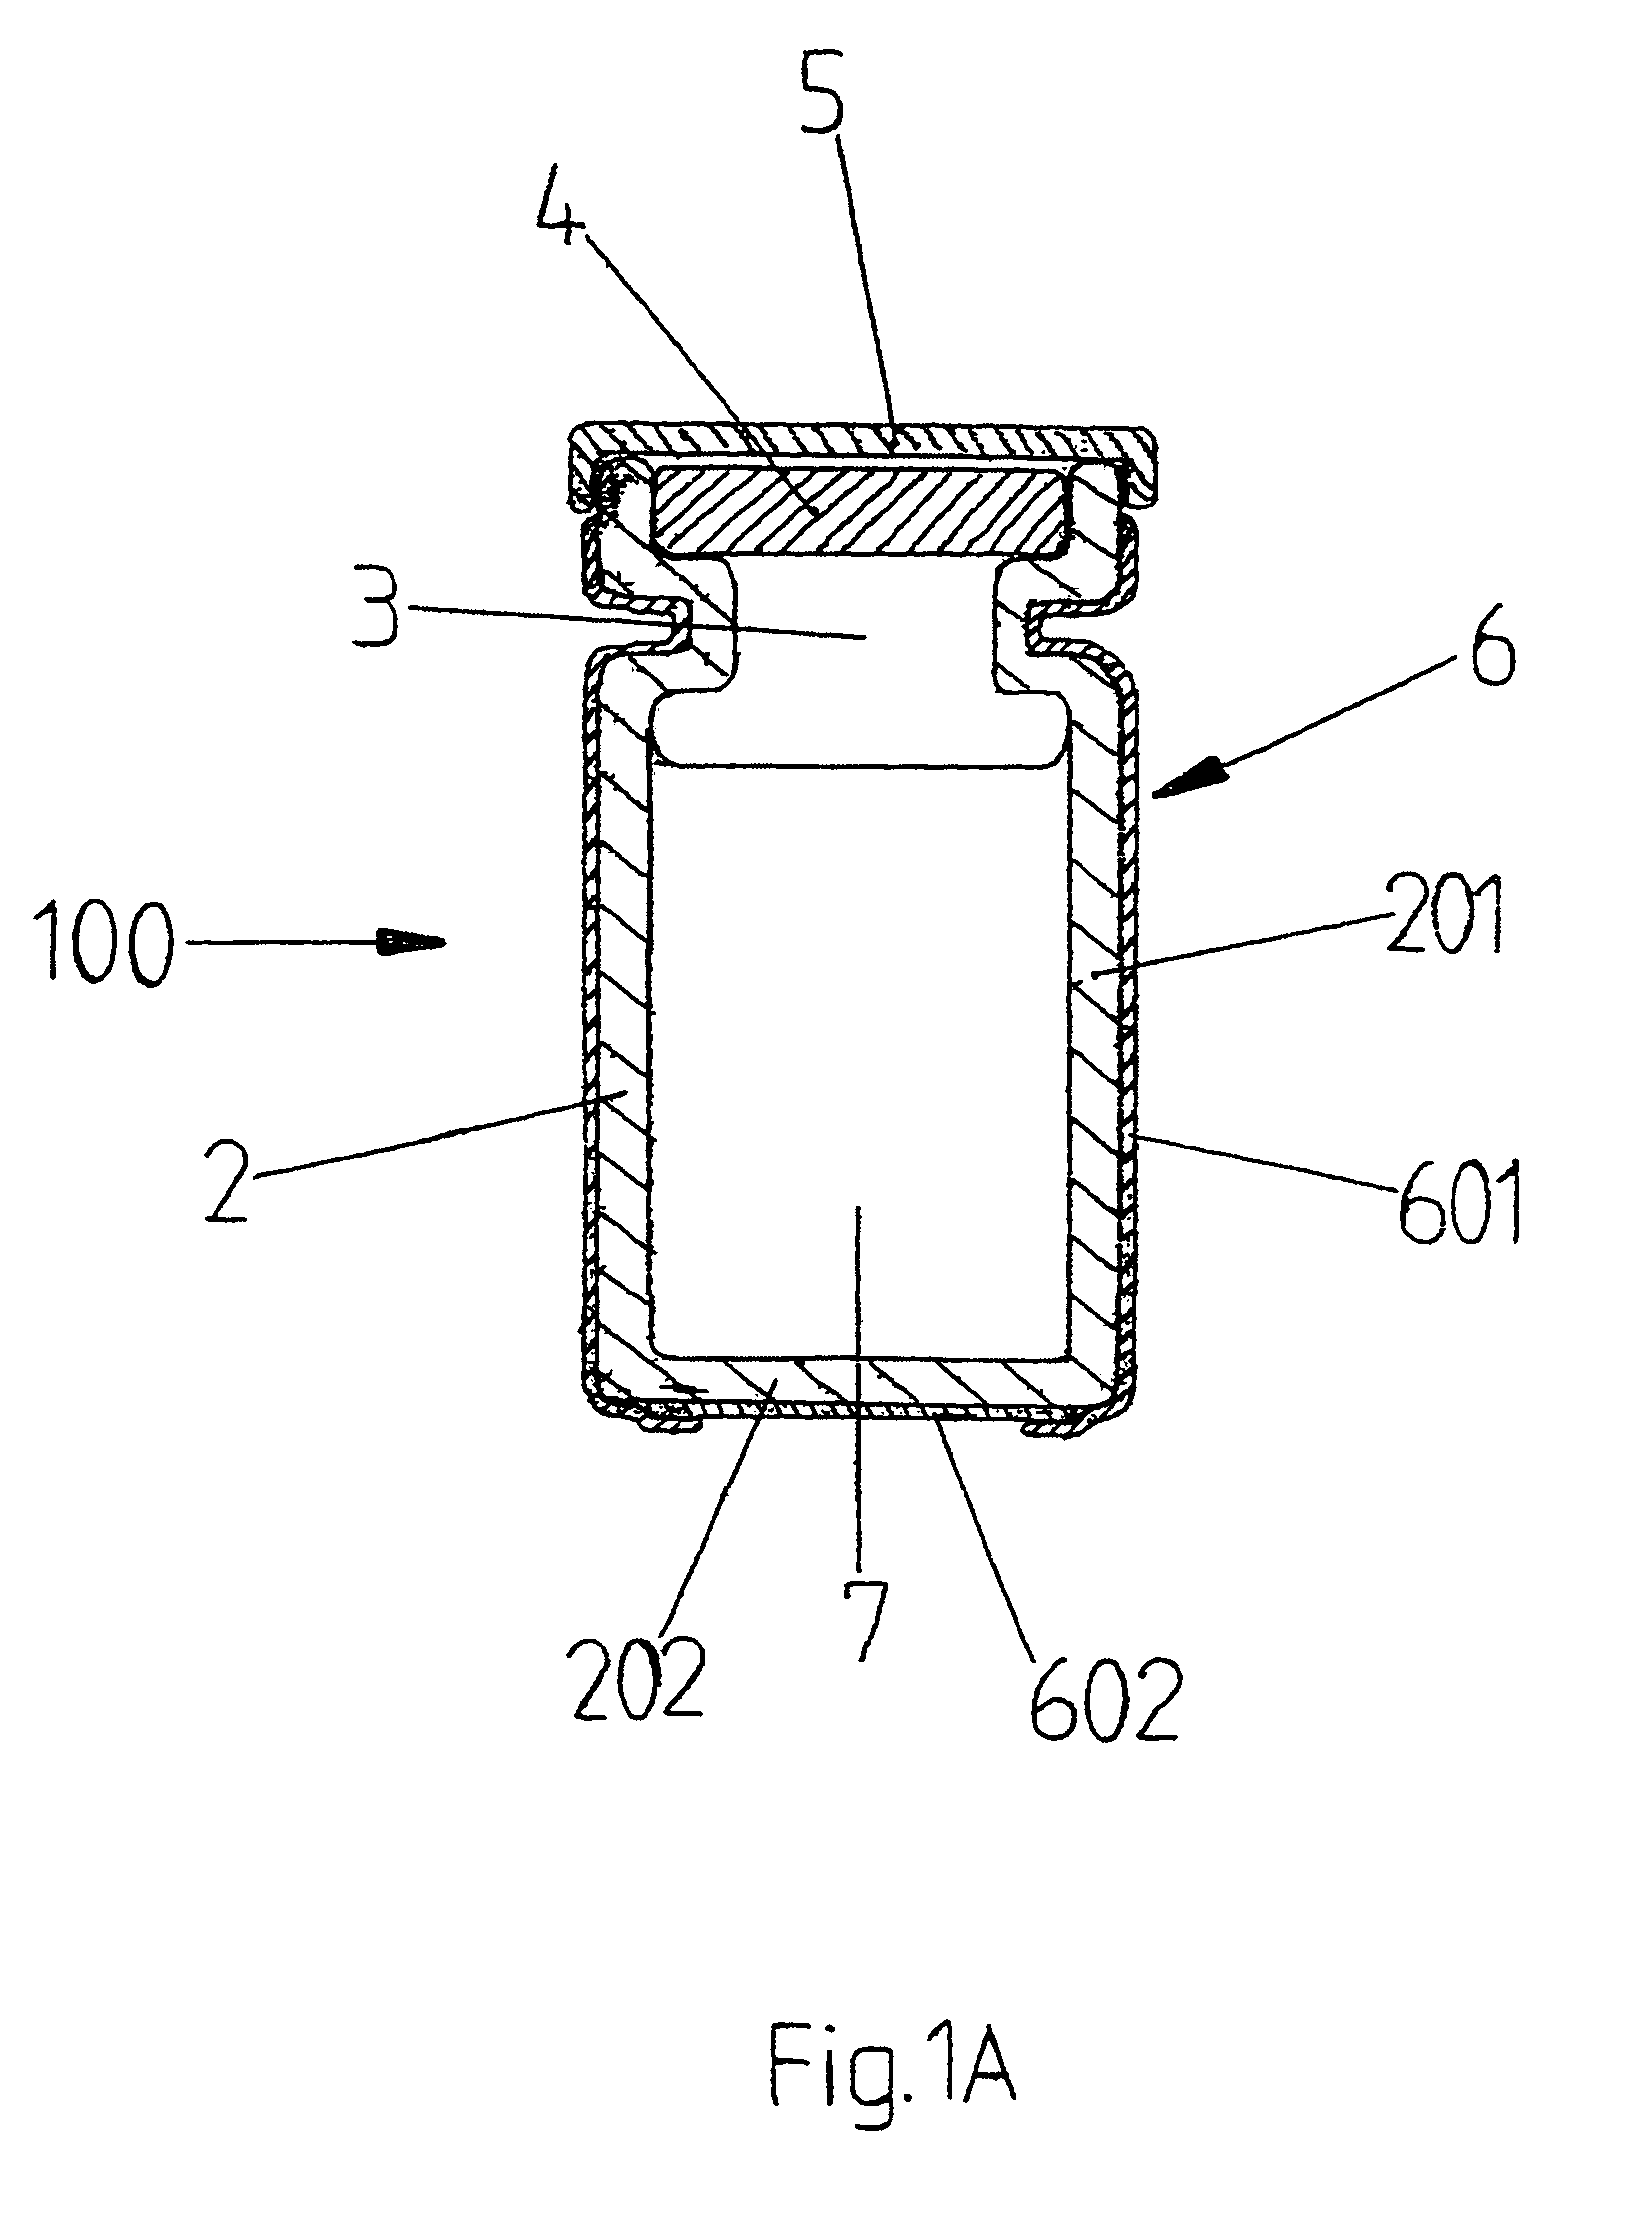 Protected vial, and method for manufacturing same